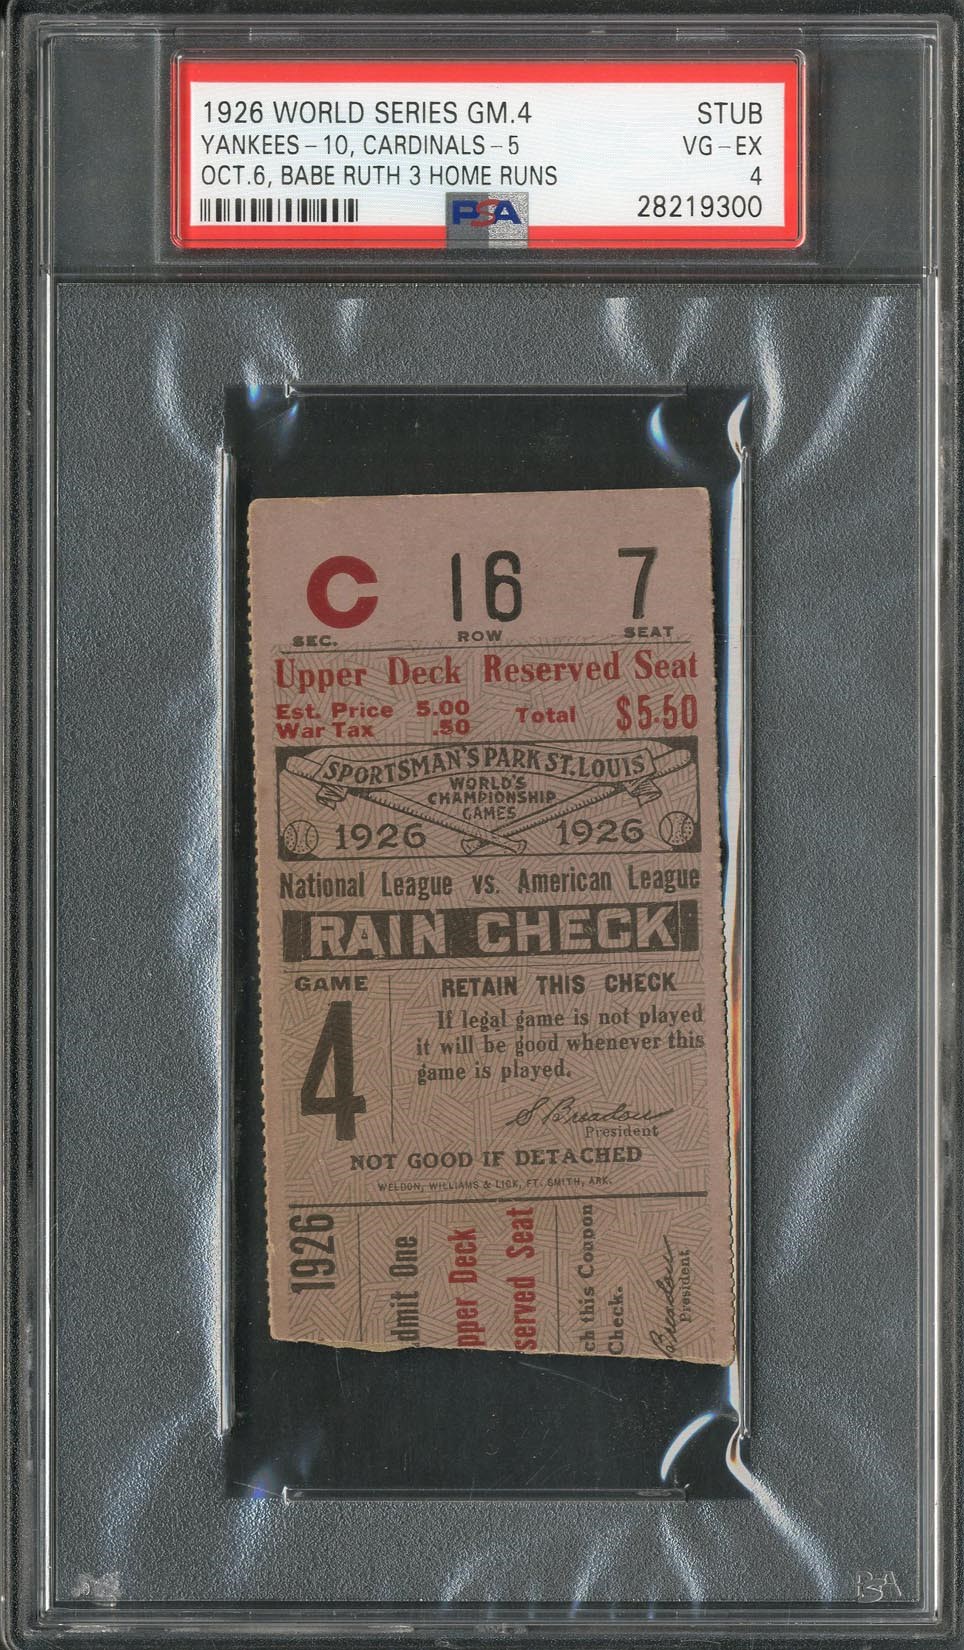 - 1926 World Series Ticket Stub from Ruth 3 Home Run Game (PSA)